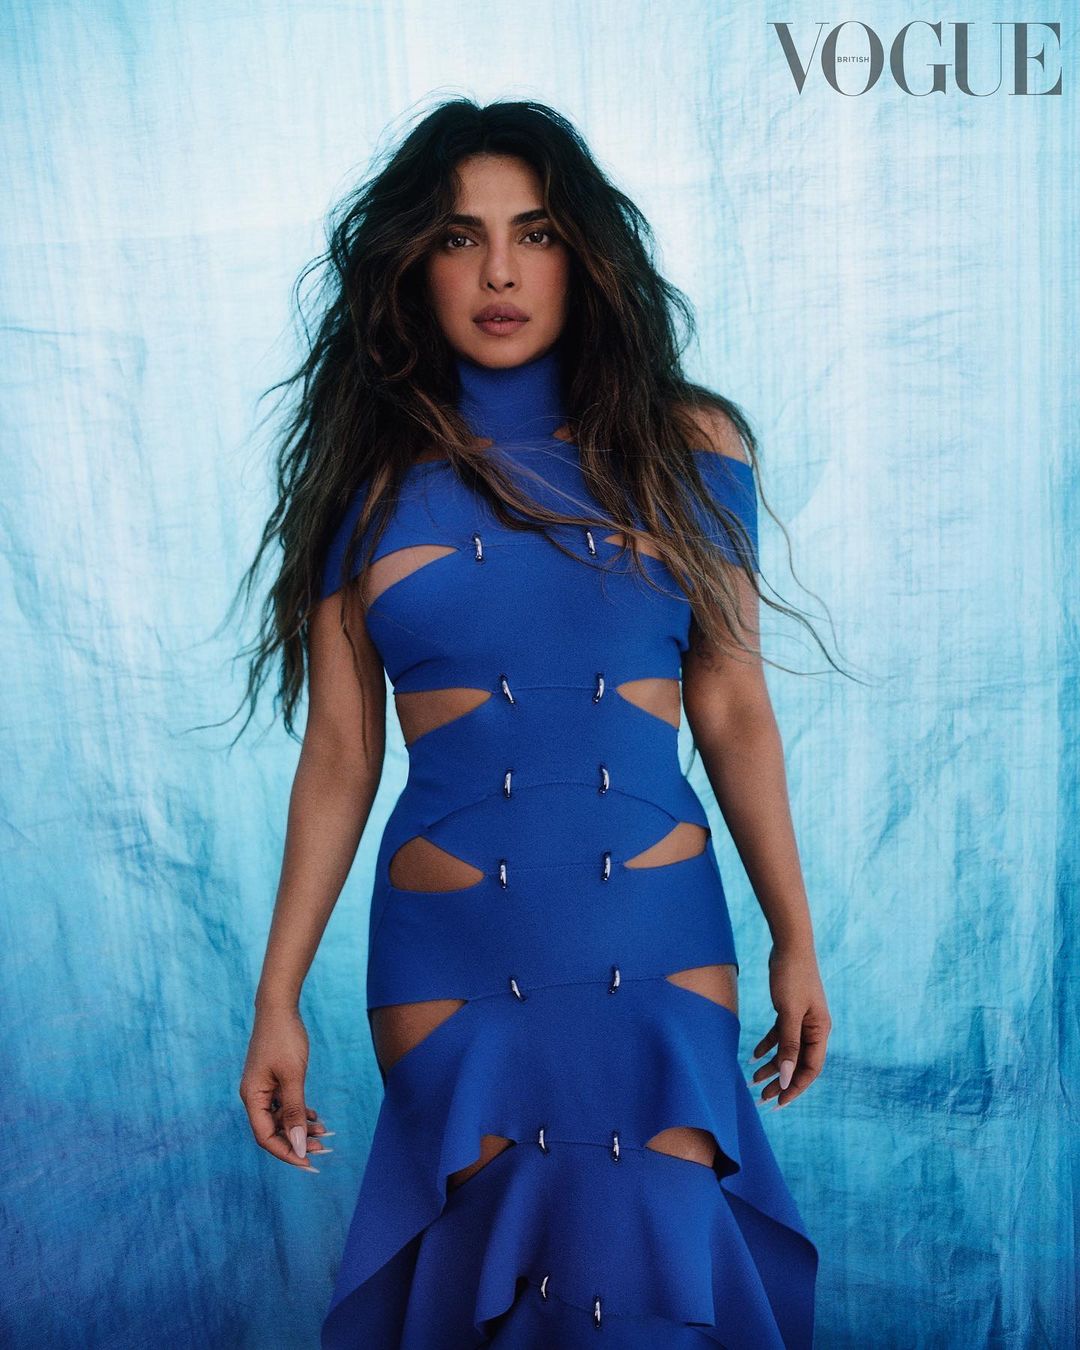 As she looks to what’s next – including romantic comedy ‘Love Again’, with #SamHeughan and #CelineDion, and the Russo brothers’ thriller series ‘Citadel’ – @PriyankaChopra wants to continue breaking down racial and ethnic barriers in entertainment. “Hopefully I’ll open doors for the next generation of girls. I want to commemorate the success and achievements of South Asians outside of India, in the international sphere, because we deserve that position,” she tells @BritishVogue in the February 2023 issue. “Why shouldn’t we be on the main stage?” See the full story in the new issue, on newsstands Tuesday 24 January, and click the link in bio to read the interview.#PriyankaChopraJonas wears all @AlexanderMcQueen, photographed by @ZoeGhertner and styled by @LuxuryLaw, with hair by @TamaraMcNaughton, make-up by @FaraHomidi, nails by @KimmieKyees, entertainment director-at-large @JillDemling, set design by @SpencerVrooman and production by @CTDInc.